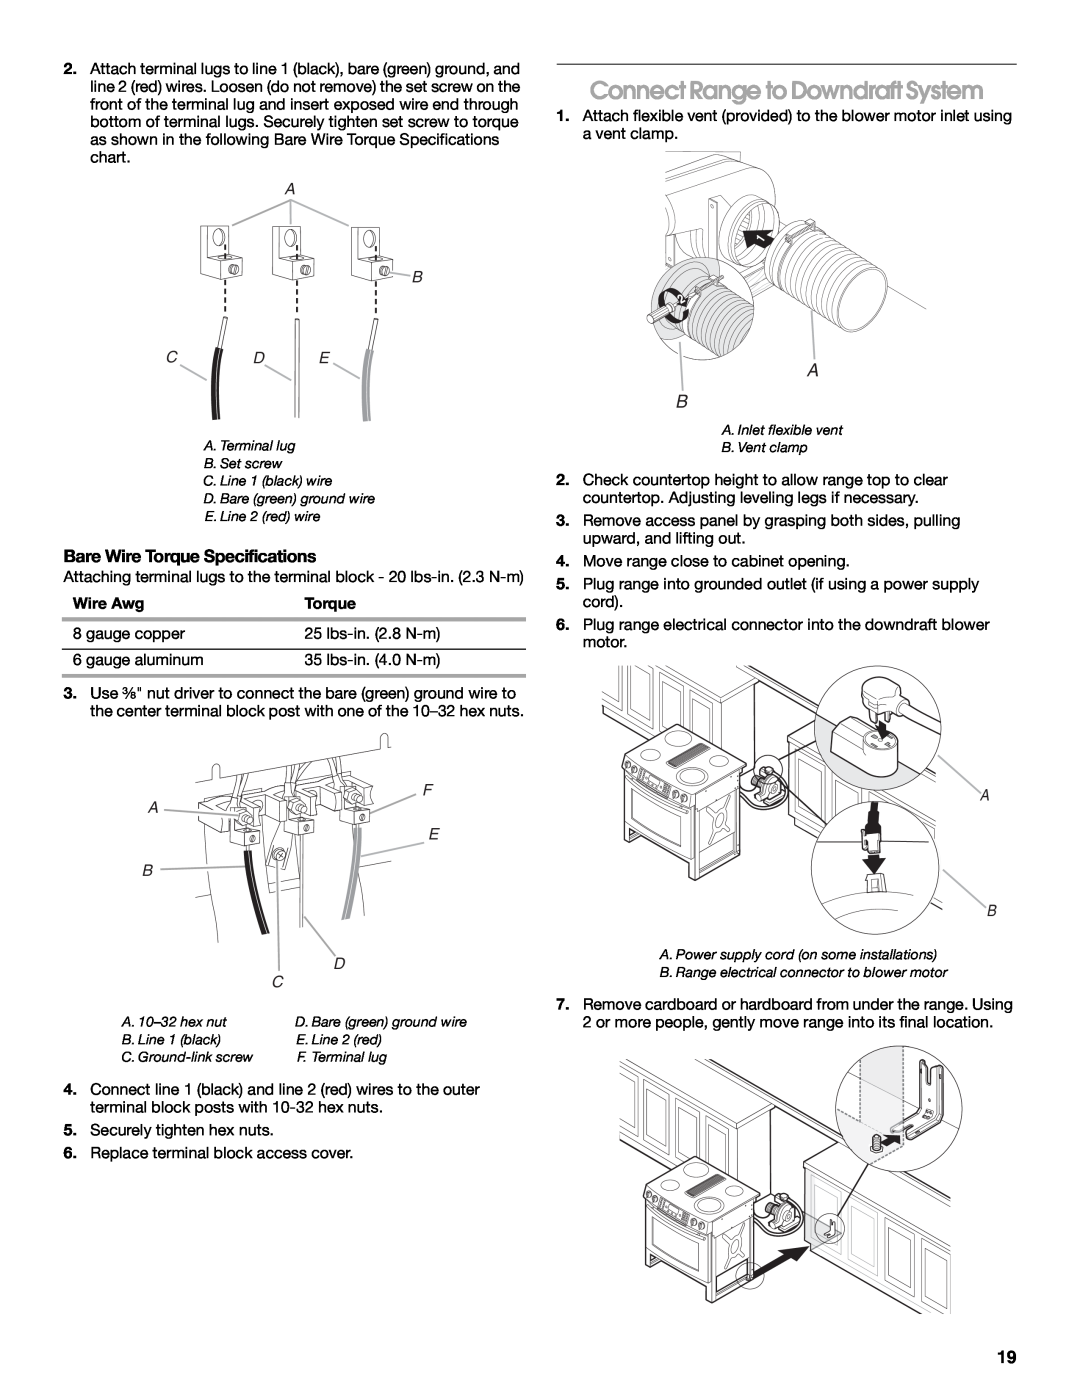 Jenn-Air W10253462A installation instructions Connect Range to Downdraft System, Bare Wire Torque Specifications, A B C D E 